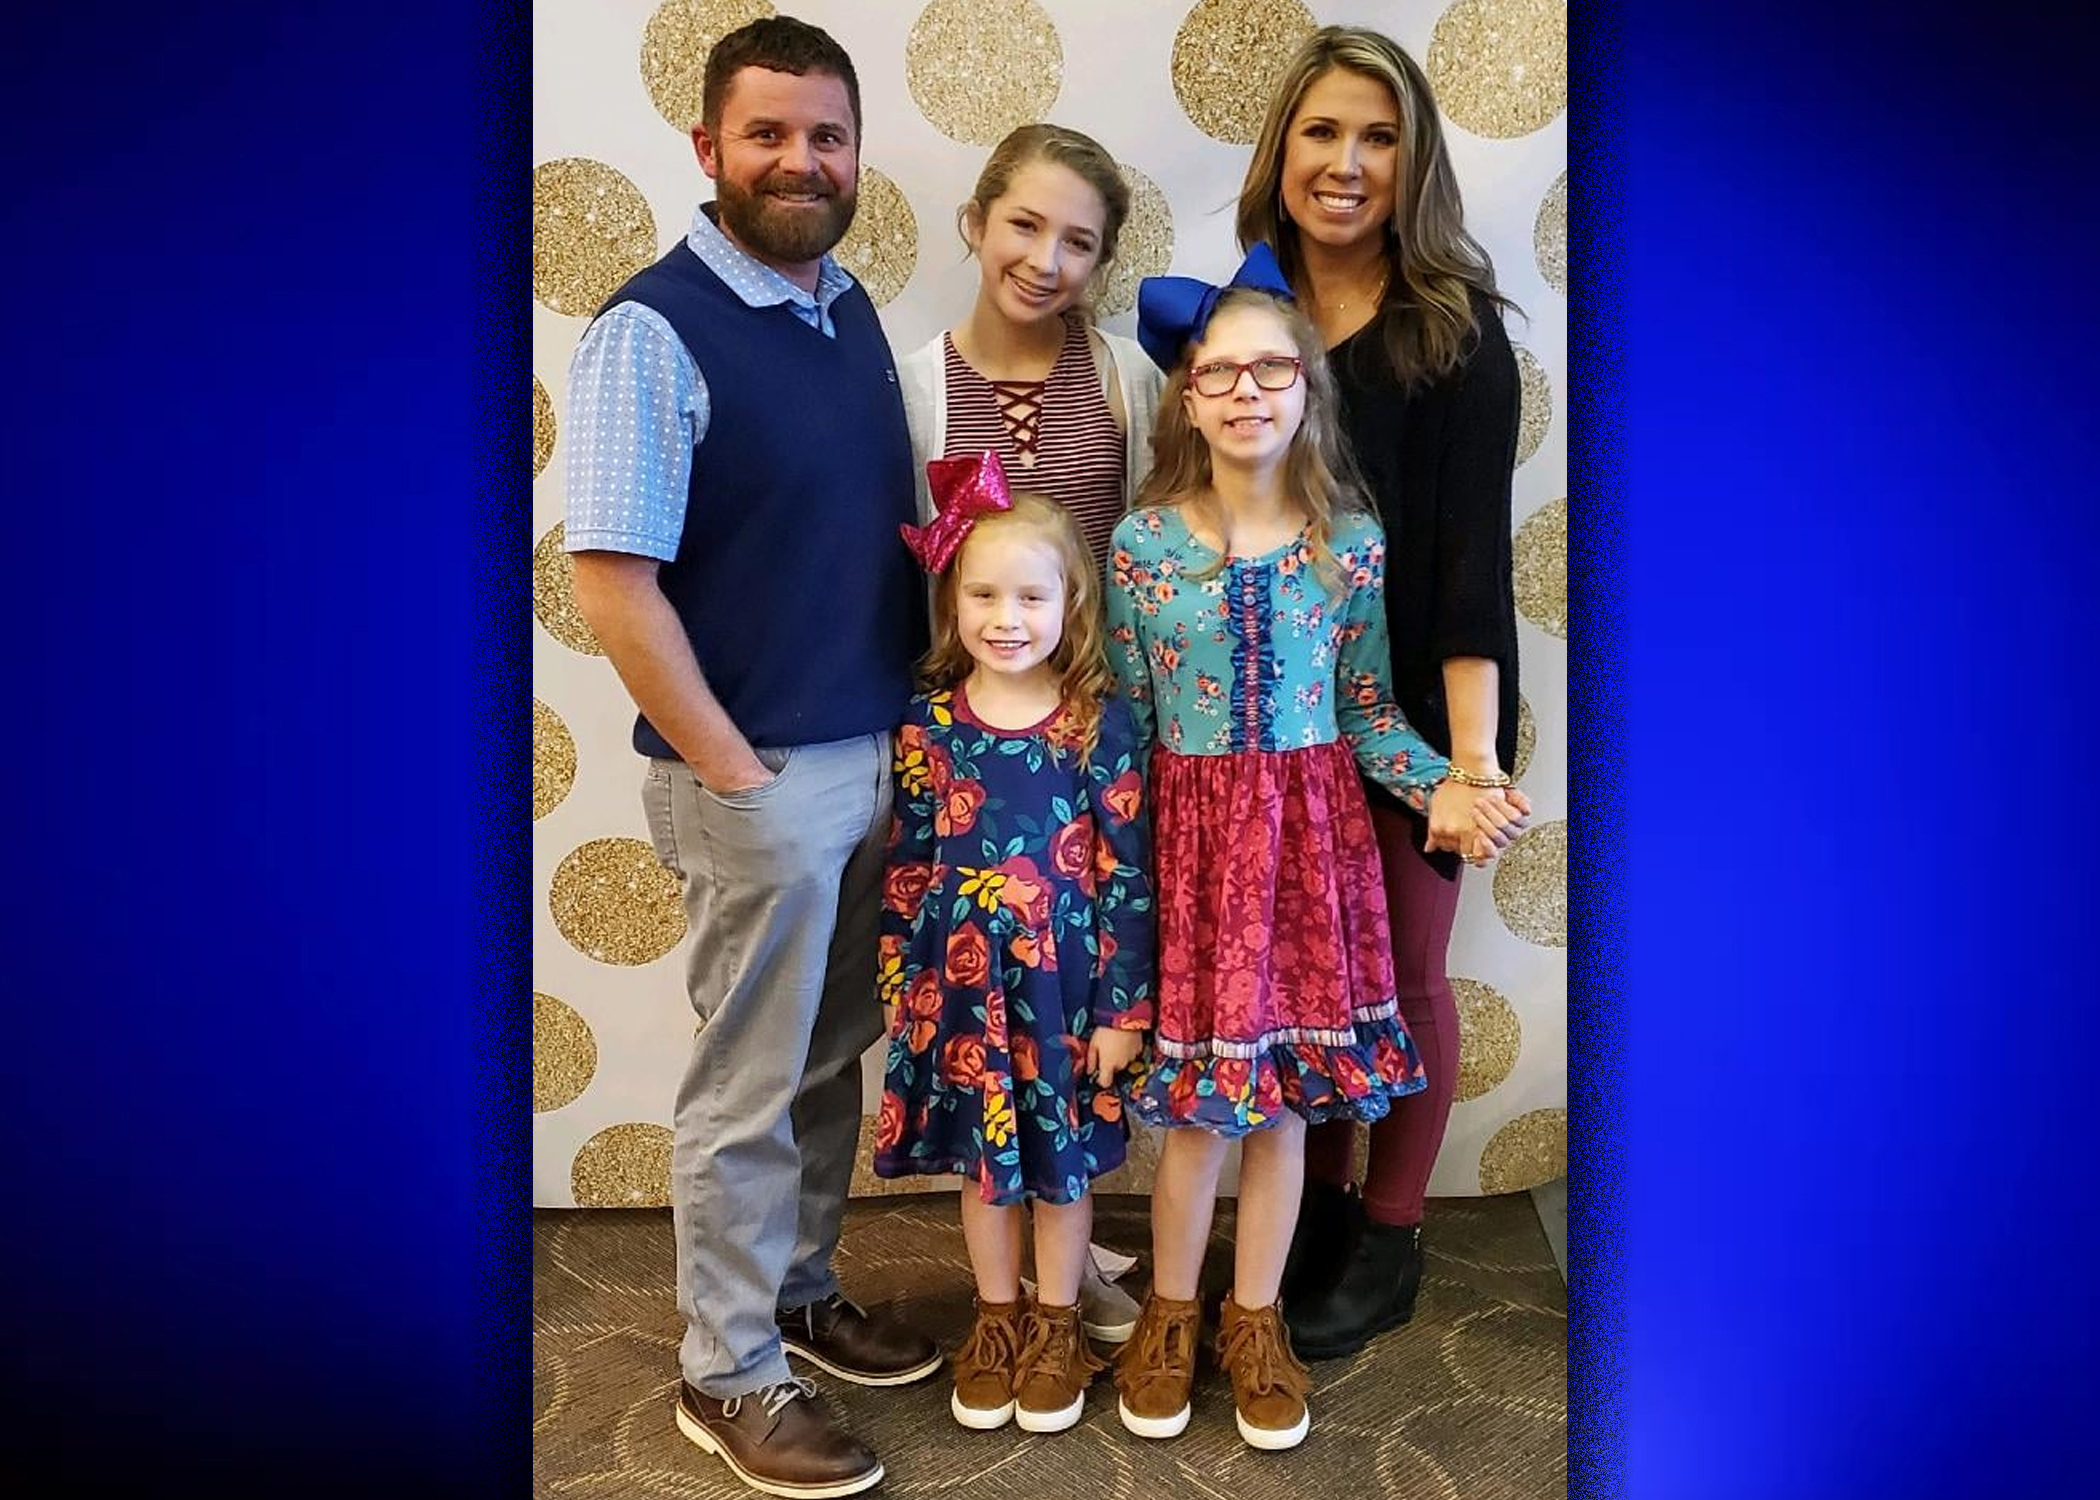 Trussville family goes public with fight for proper education for blind daughter and all students